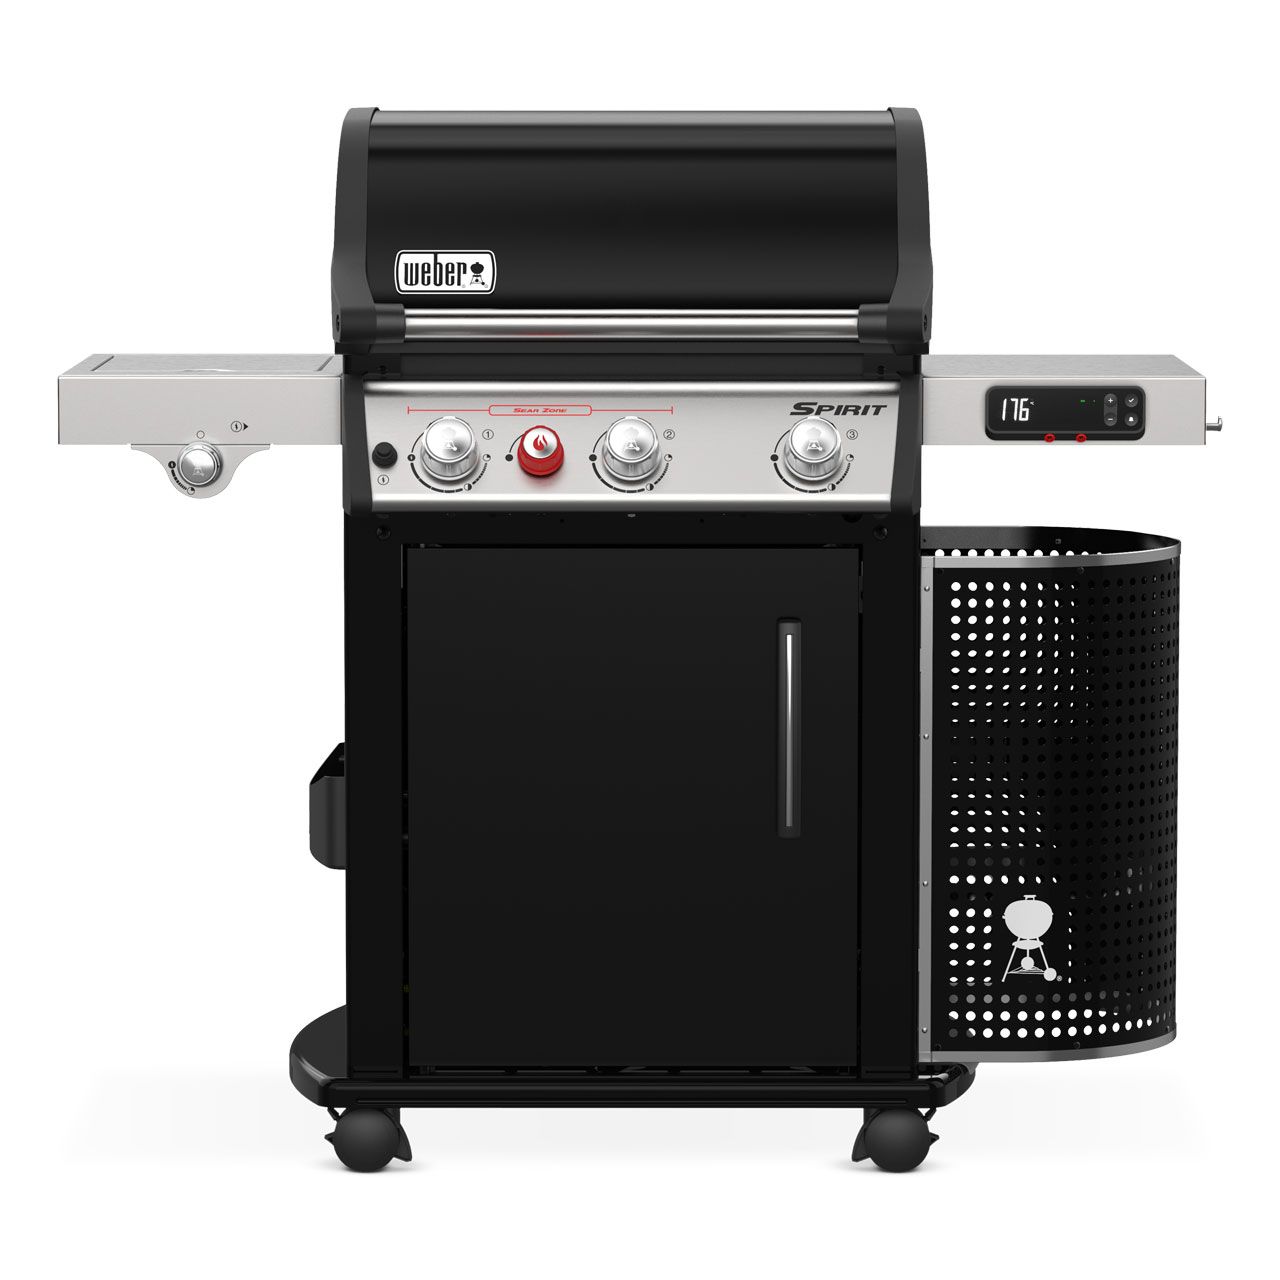 Spirit EPX-335 GBS Smart Grill inkl. Weber Crafted Plancha + Plancha Tool Set 3 tlg. 